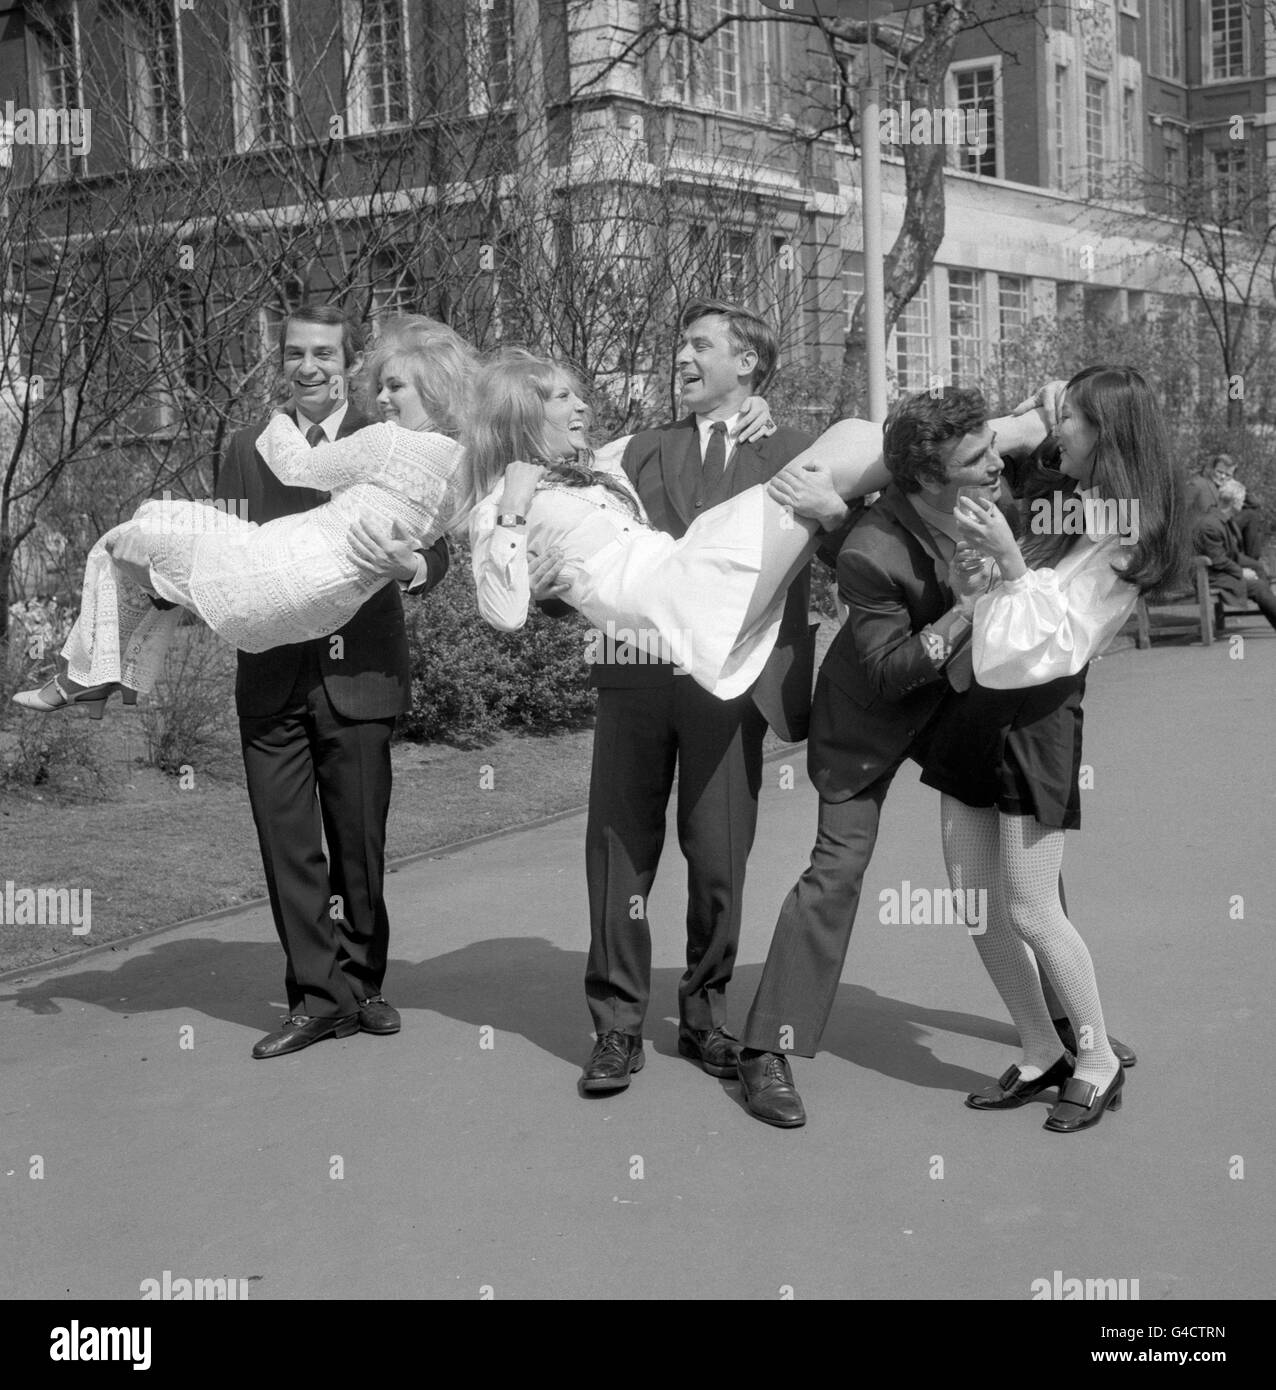 (l-r) Ben Gazzara carrying Jenny Lee-Wright, John Cassavetes carrying Jenny Runacre and Peter Falk with Noelle Kao at the Embankment Gardens, London. They all star in the film 'Husbands'. The men are all American Actors, (Peter Falk becoming famous for playing Lieutenant Columbo) who hand-picked the actresses for the roles of their girlfriends after interviewing 500 candidates. Miss Lee-Wright is the only only English girl. She studies ballet with Ballet Rambert. She has been a Lionel Blair dancer, and it was Lionel's wife Sue who suggested Jenny for the part in 'Husbands'. South African born Stock Photo